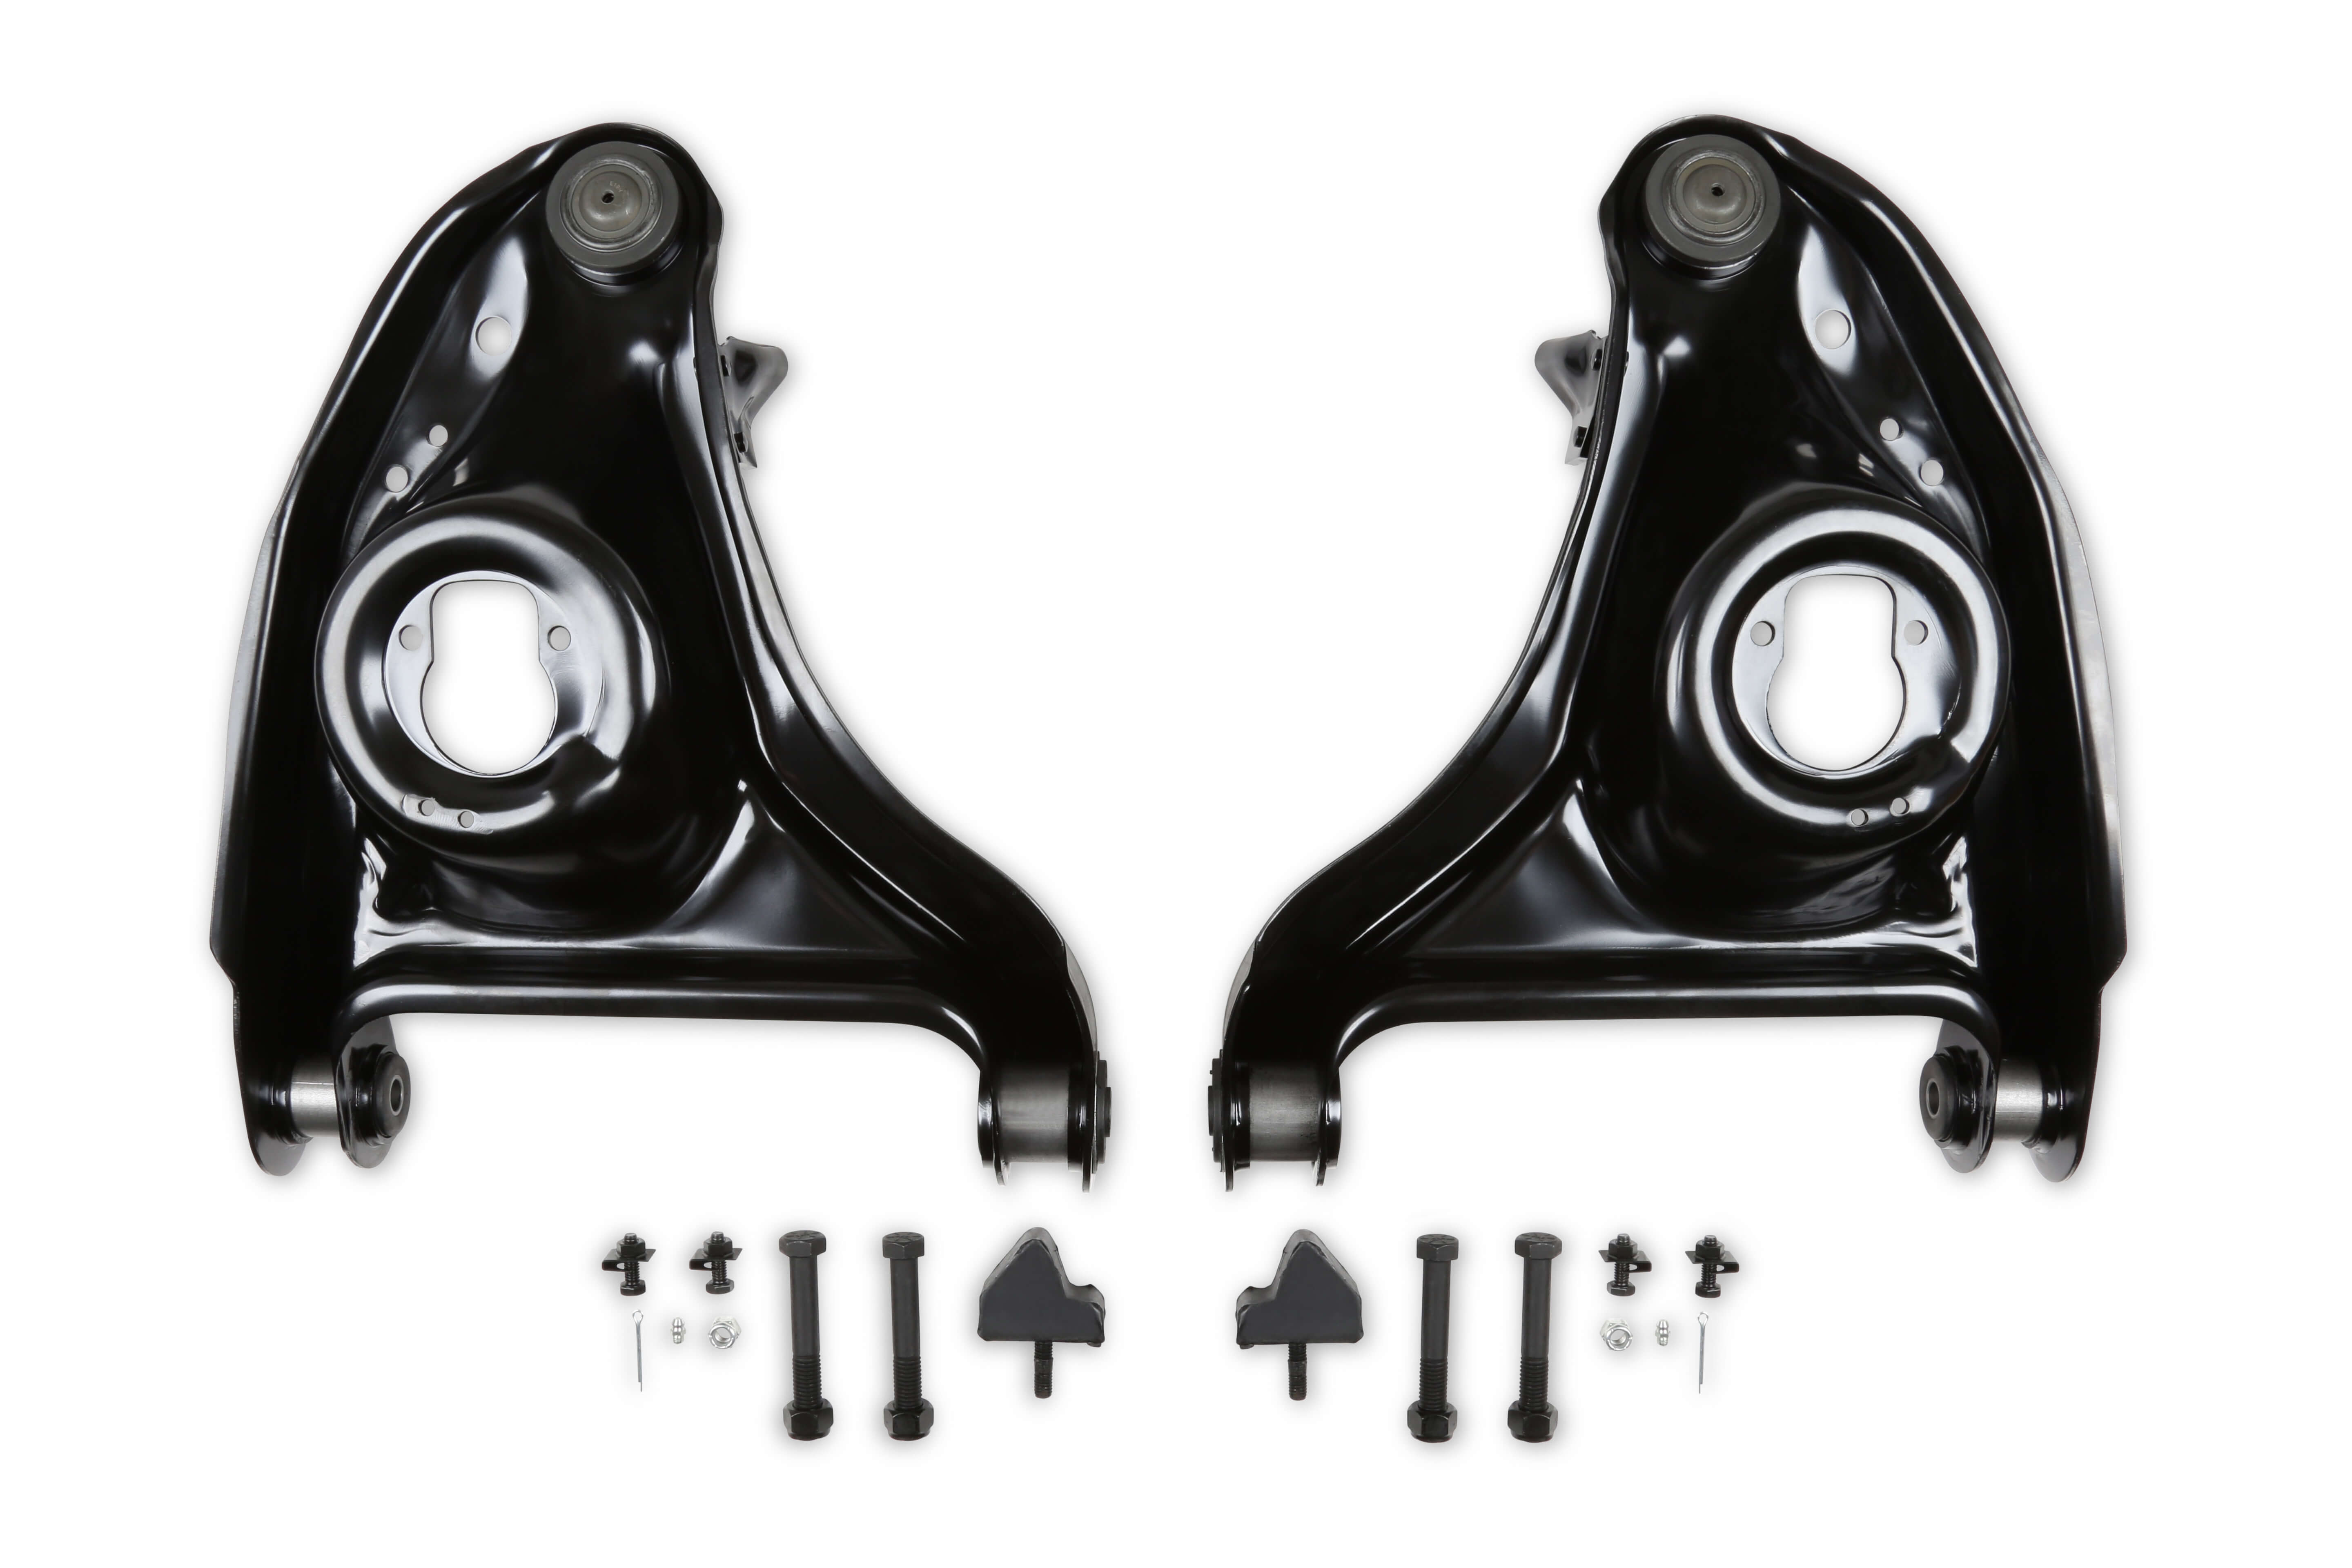 Rekudo RK100-21L Control Arm, Stamped, Driver / Passenger Side, Lower, Press-In Ball Joints, Steel, Black Paint, GM F-Body 1970-81, Pair